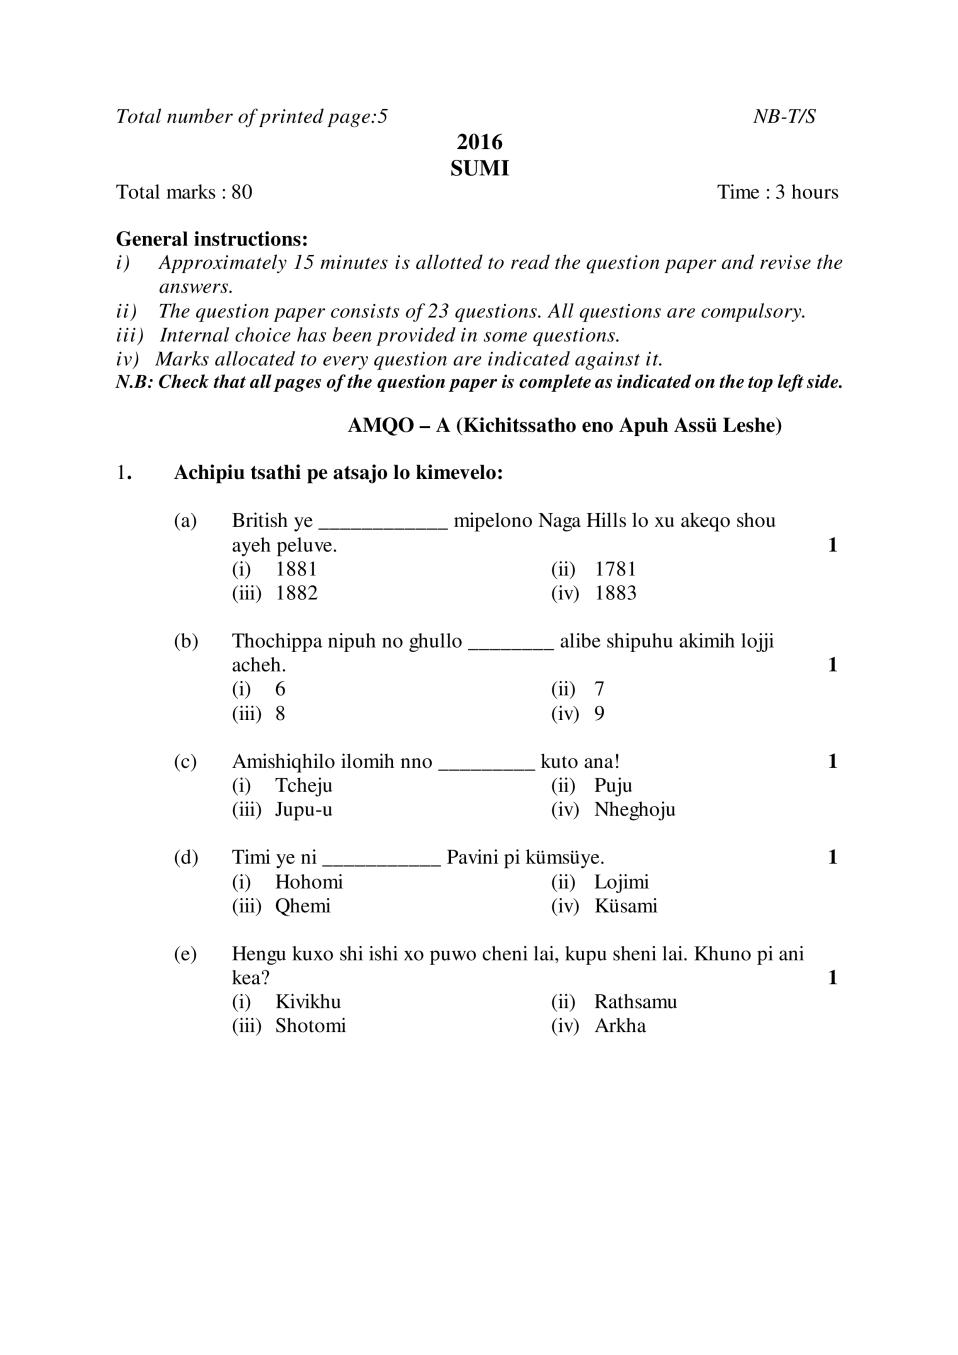 NBSE Class 10 Question Paper 2016 for Sumi - Page 1